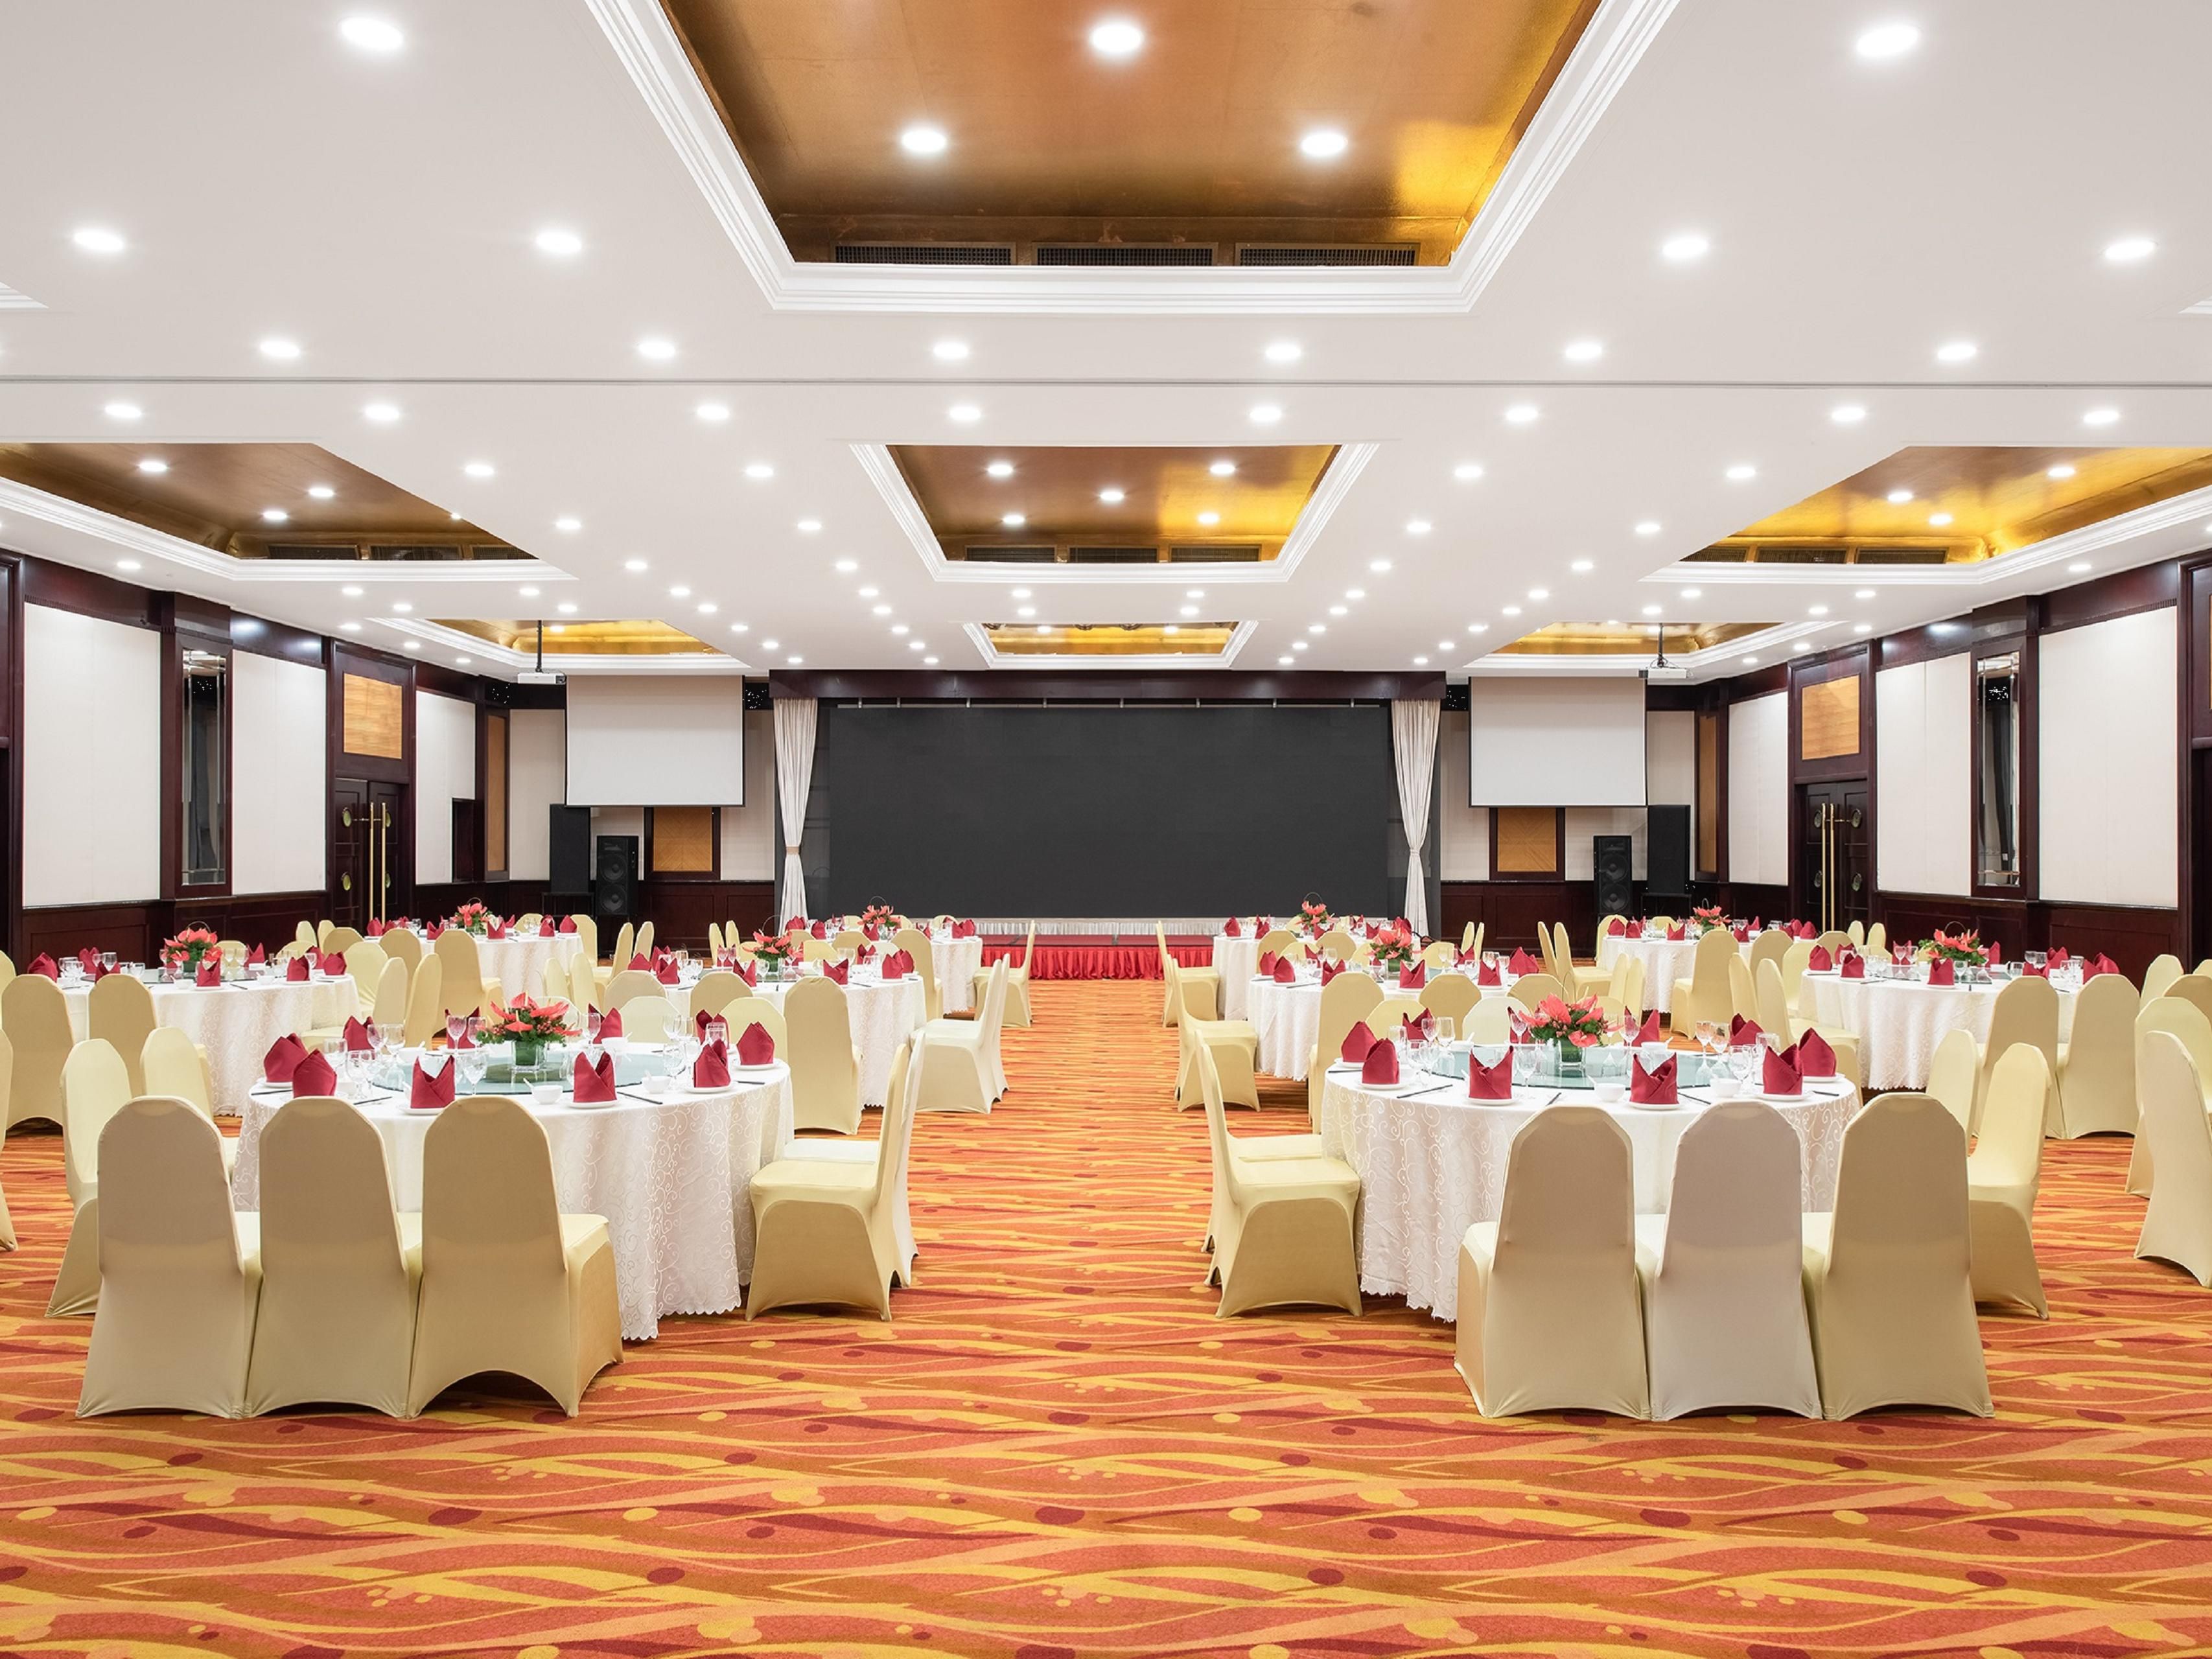 388 sqm Ballroom on 2nd Floor providing the maximum space of 300 seating.